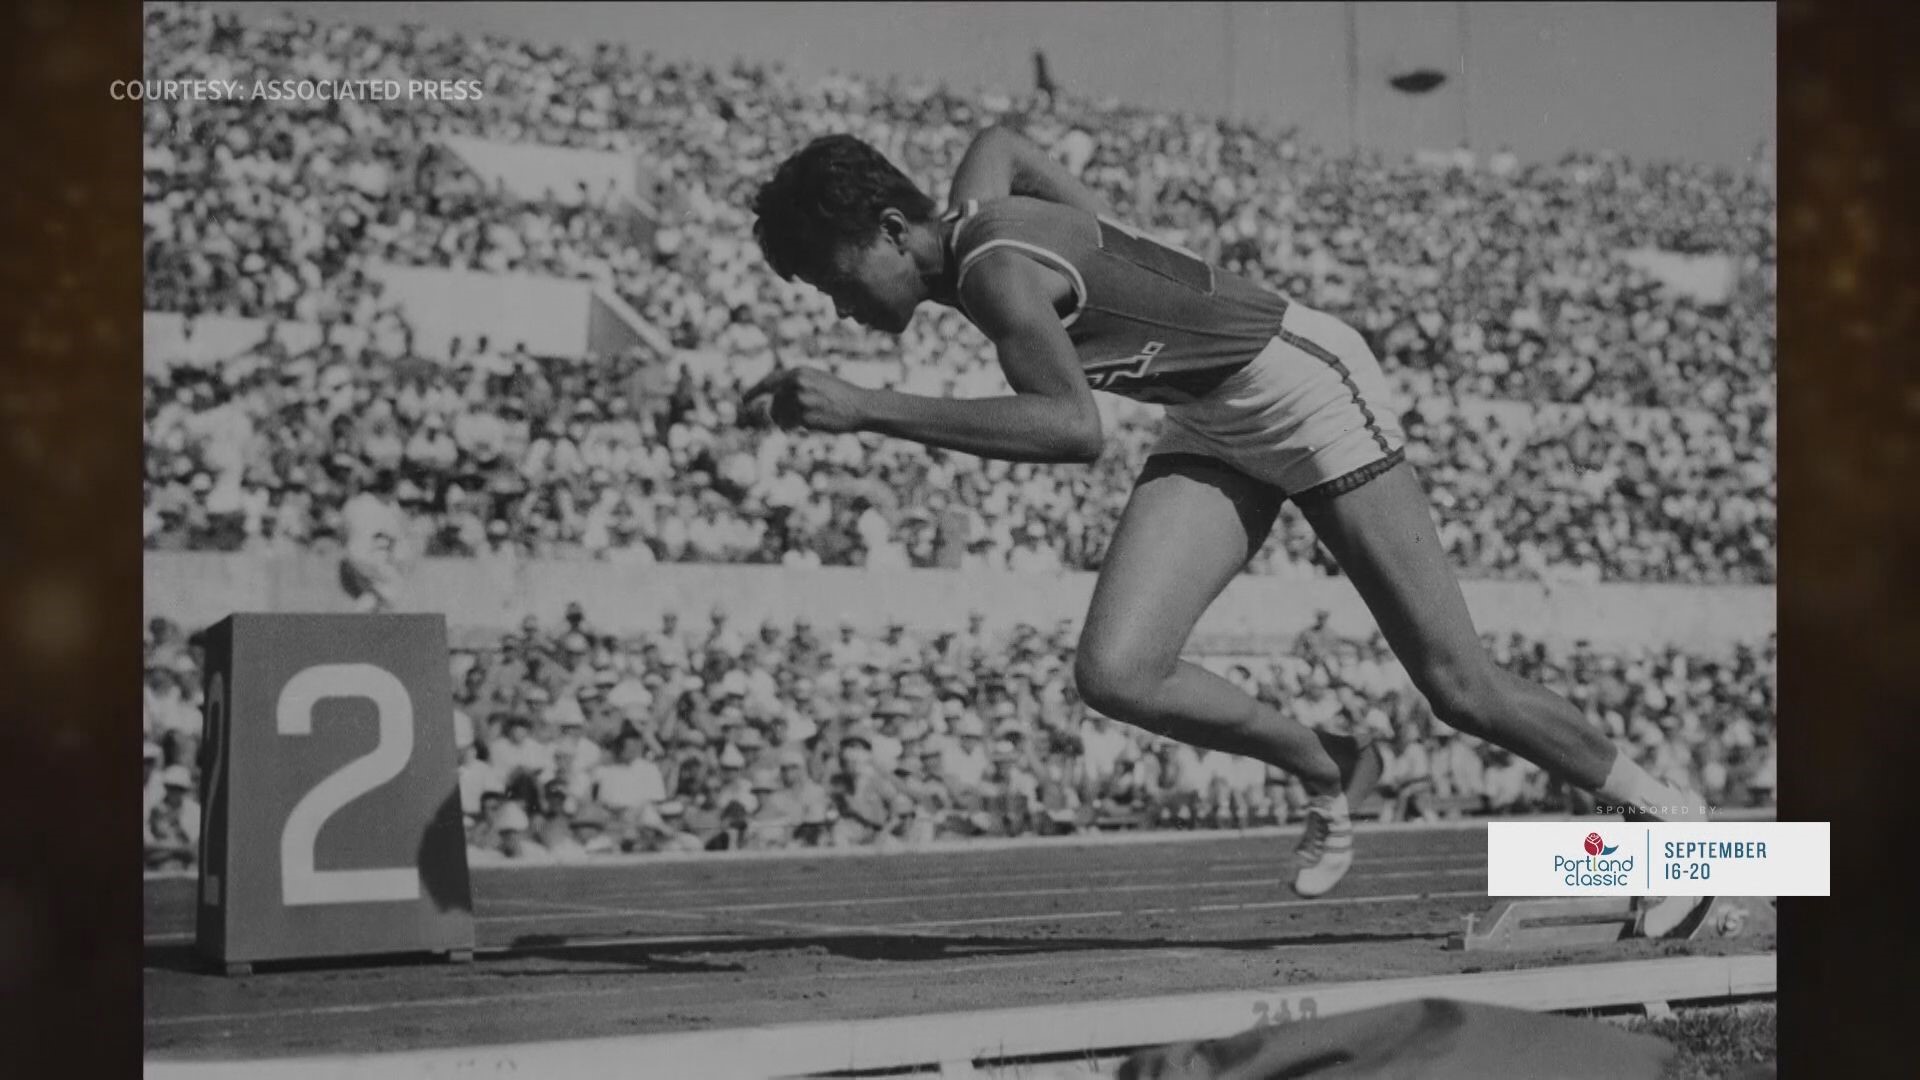 Wilma Rudolph set a world record and won gold in the 100-meter and 200-meter sprints, and the 4x100 meter relay in the 1960 Olympic Games in Rome, Italy.